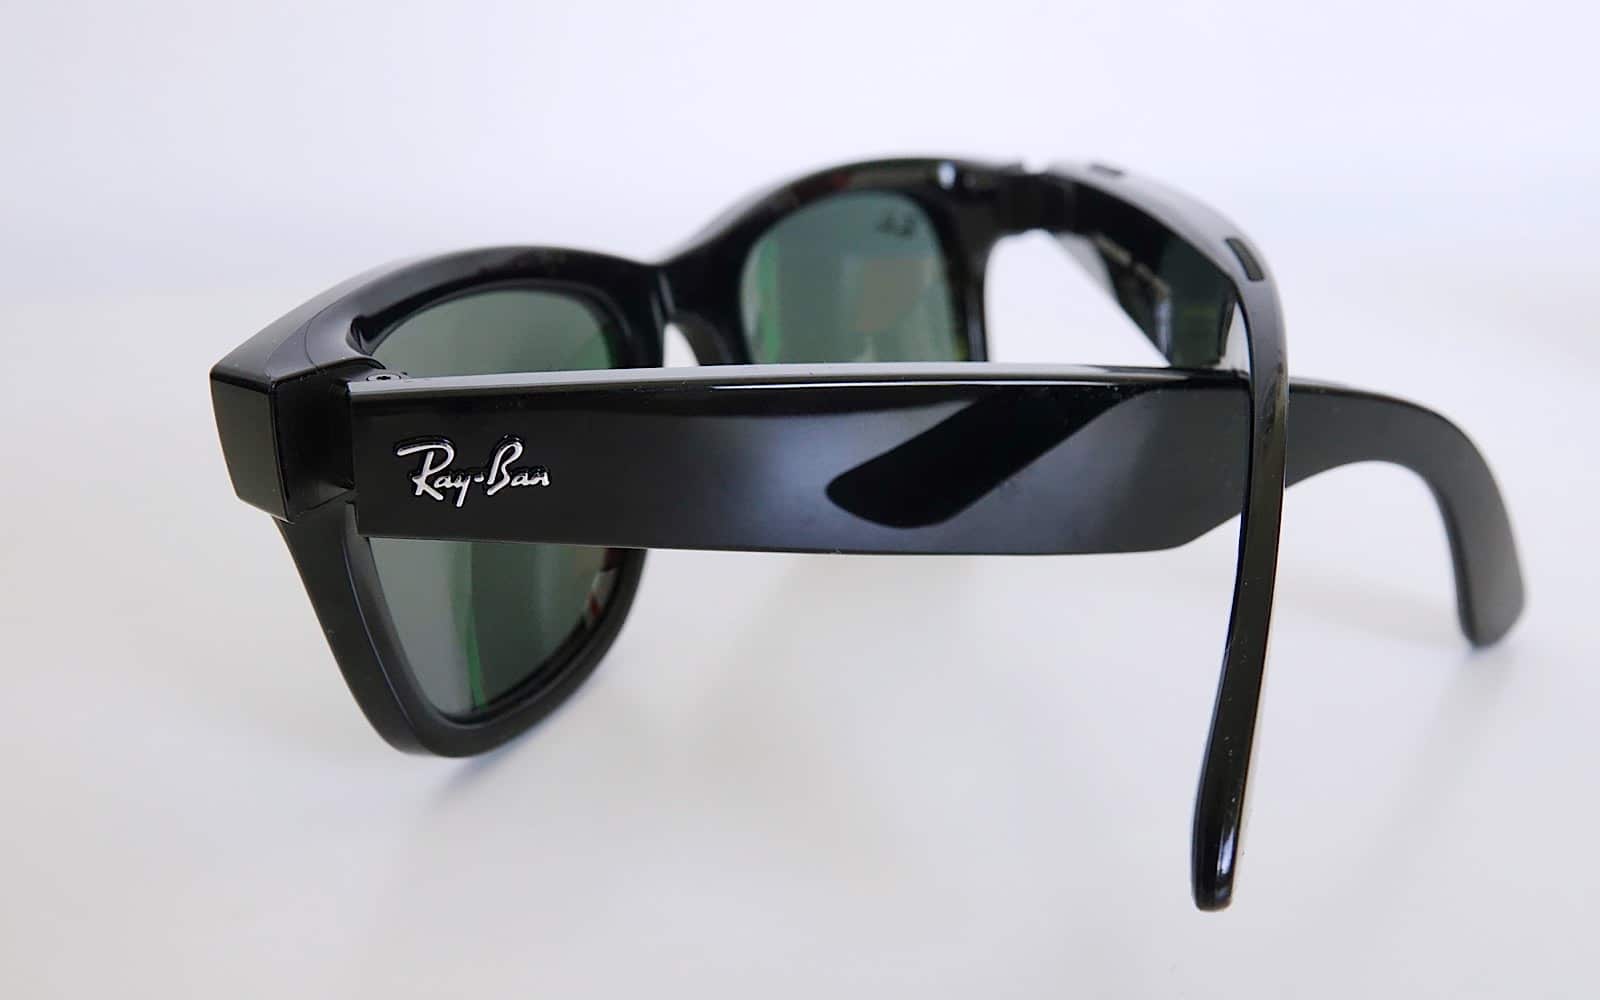 The "Ray-Ban" logo on the Facebook Ray-Ban Stories smartglasses tells you these are real glasses, not just a knock-off by another brand.